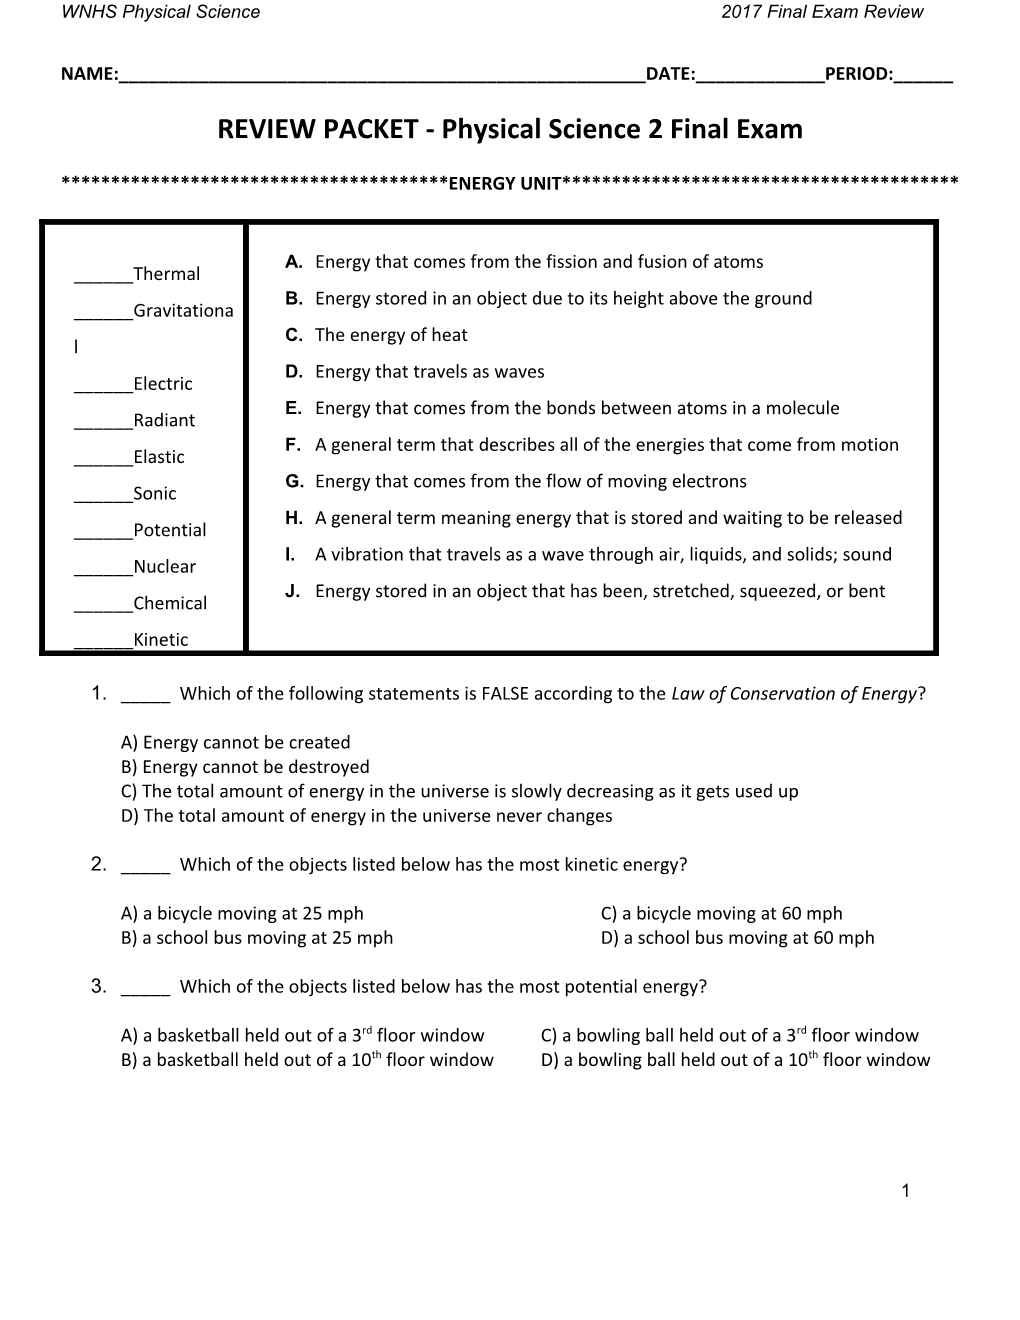 REVIEW PACKET - Physical Science 2 Final Exam